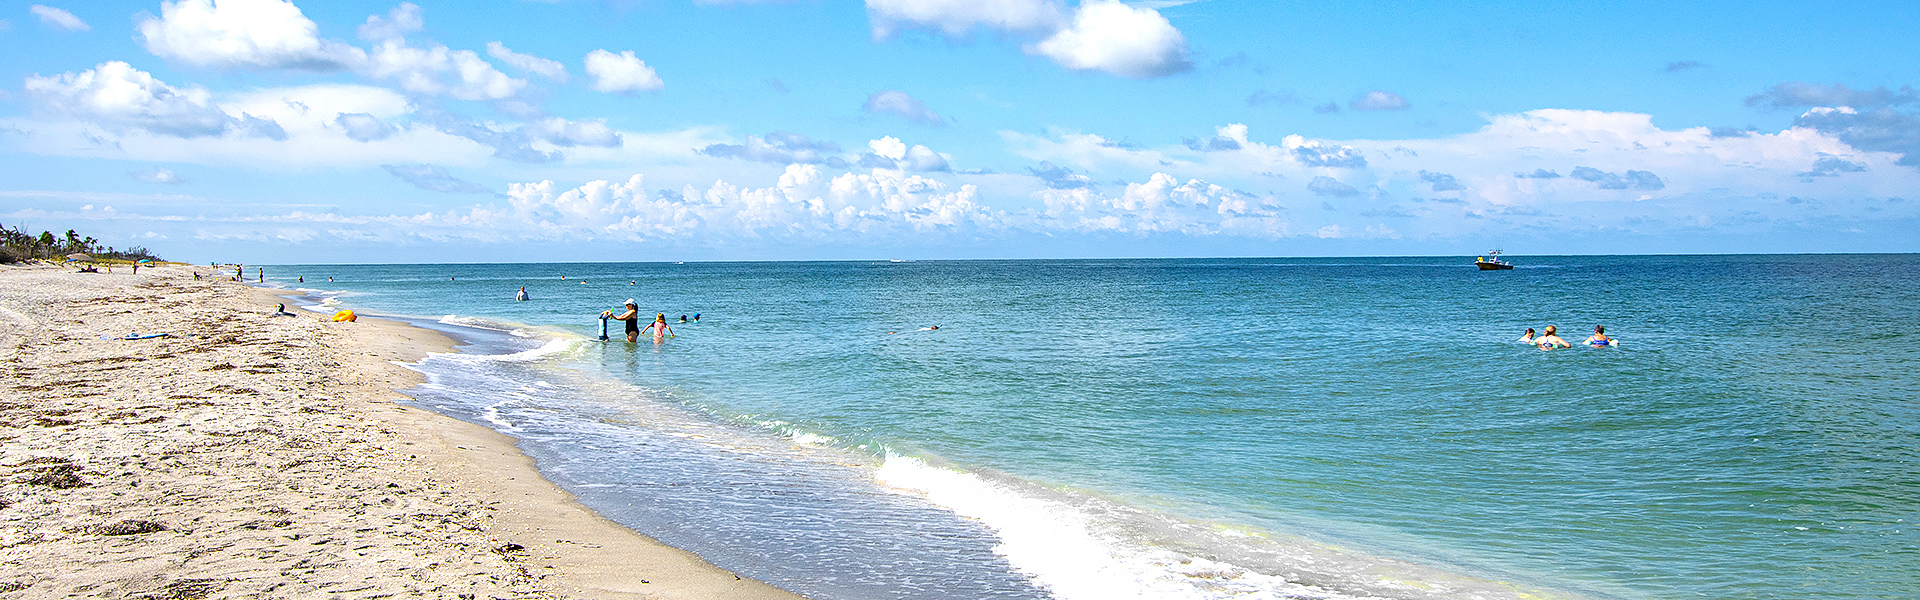 People in the water on the beaches of Sanibel.